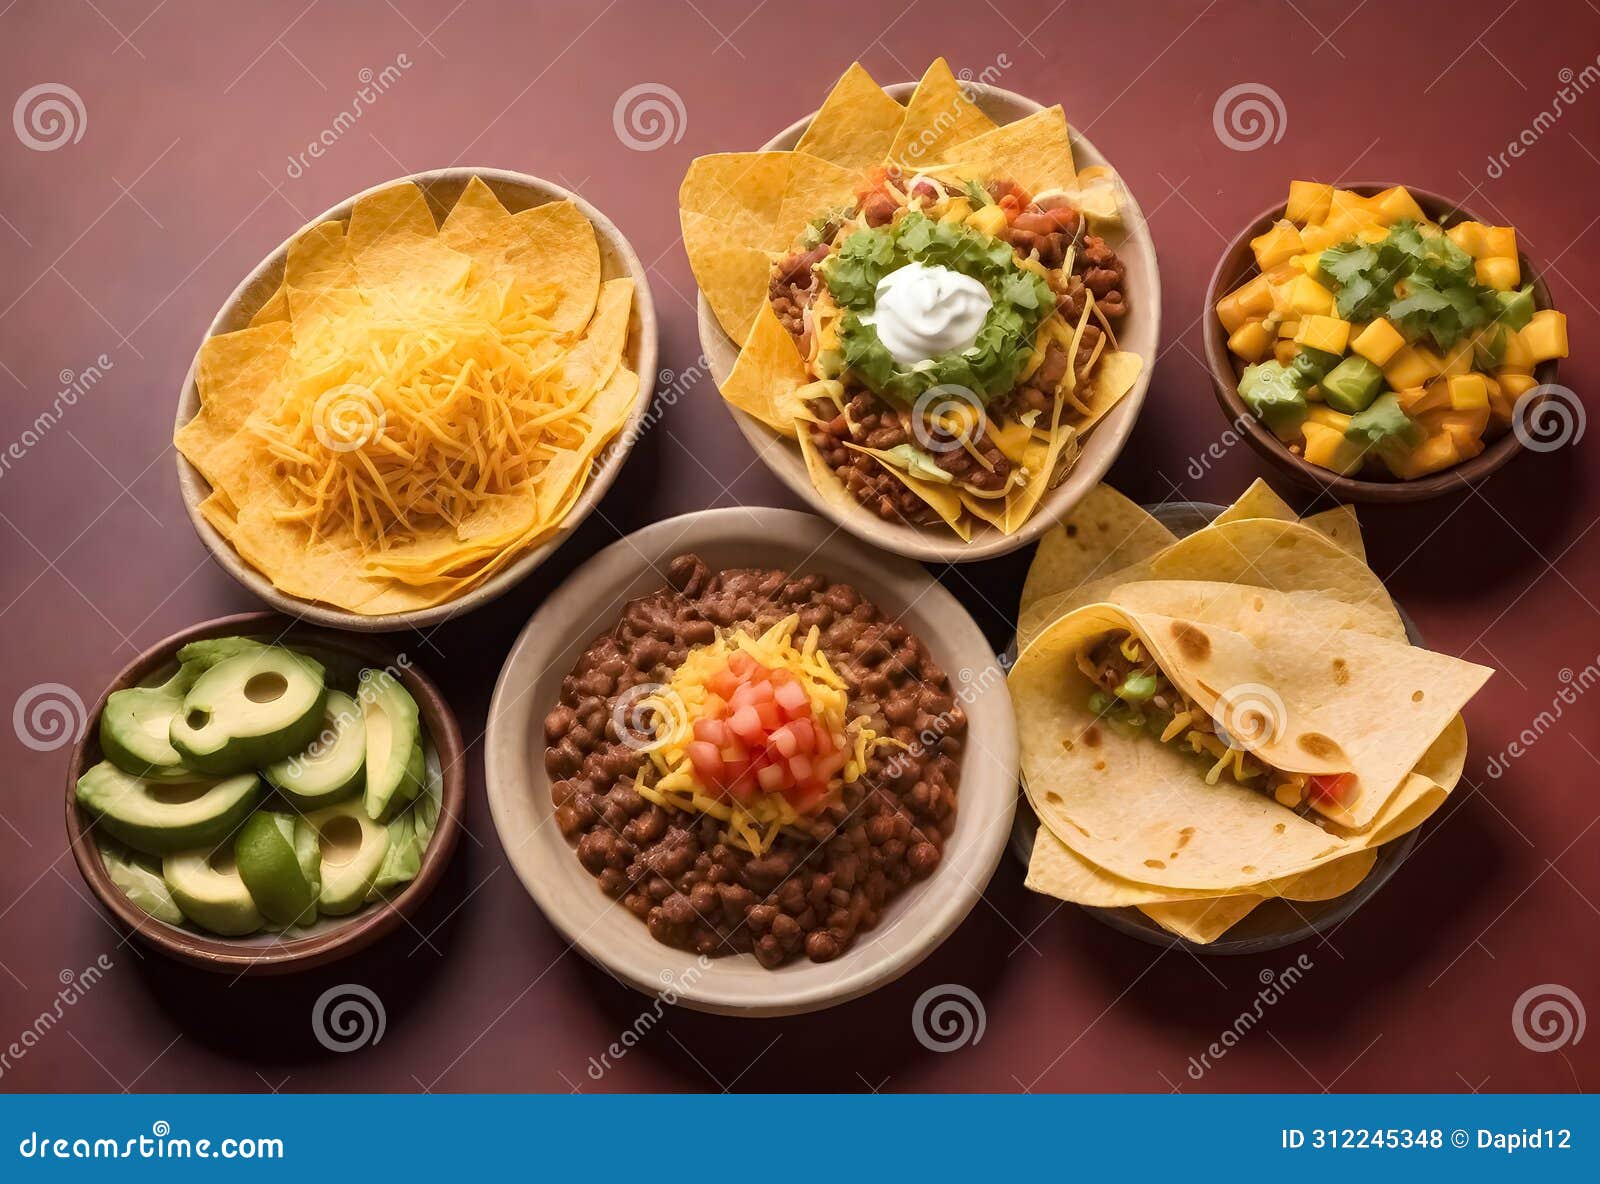 a variety of mexican food dishes in bowls